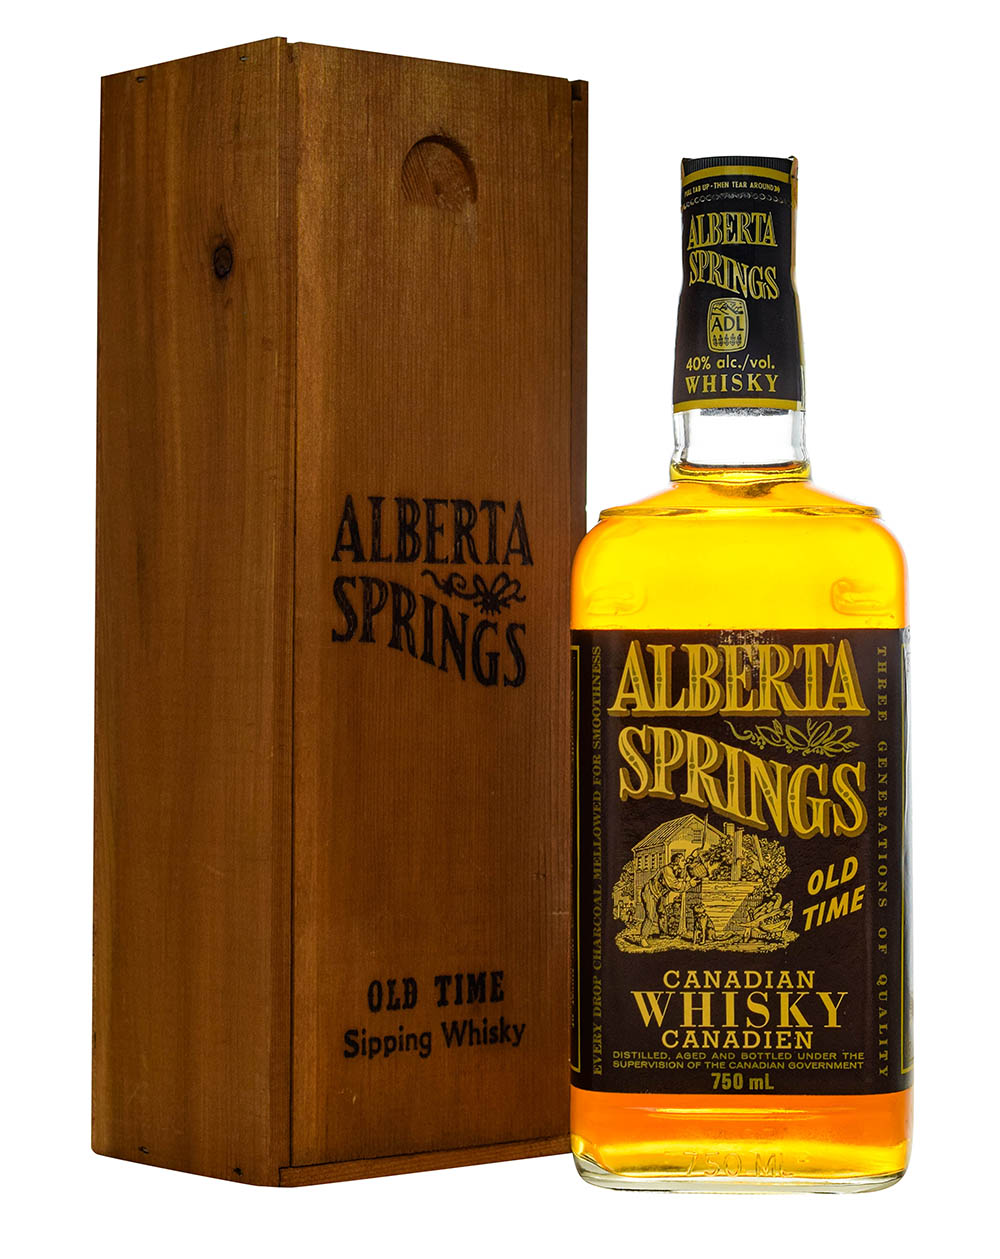 Alberta Springs Old Time Canadian Whisky Box